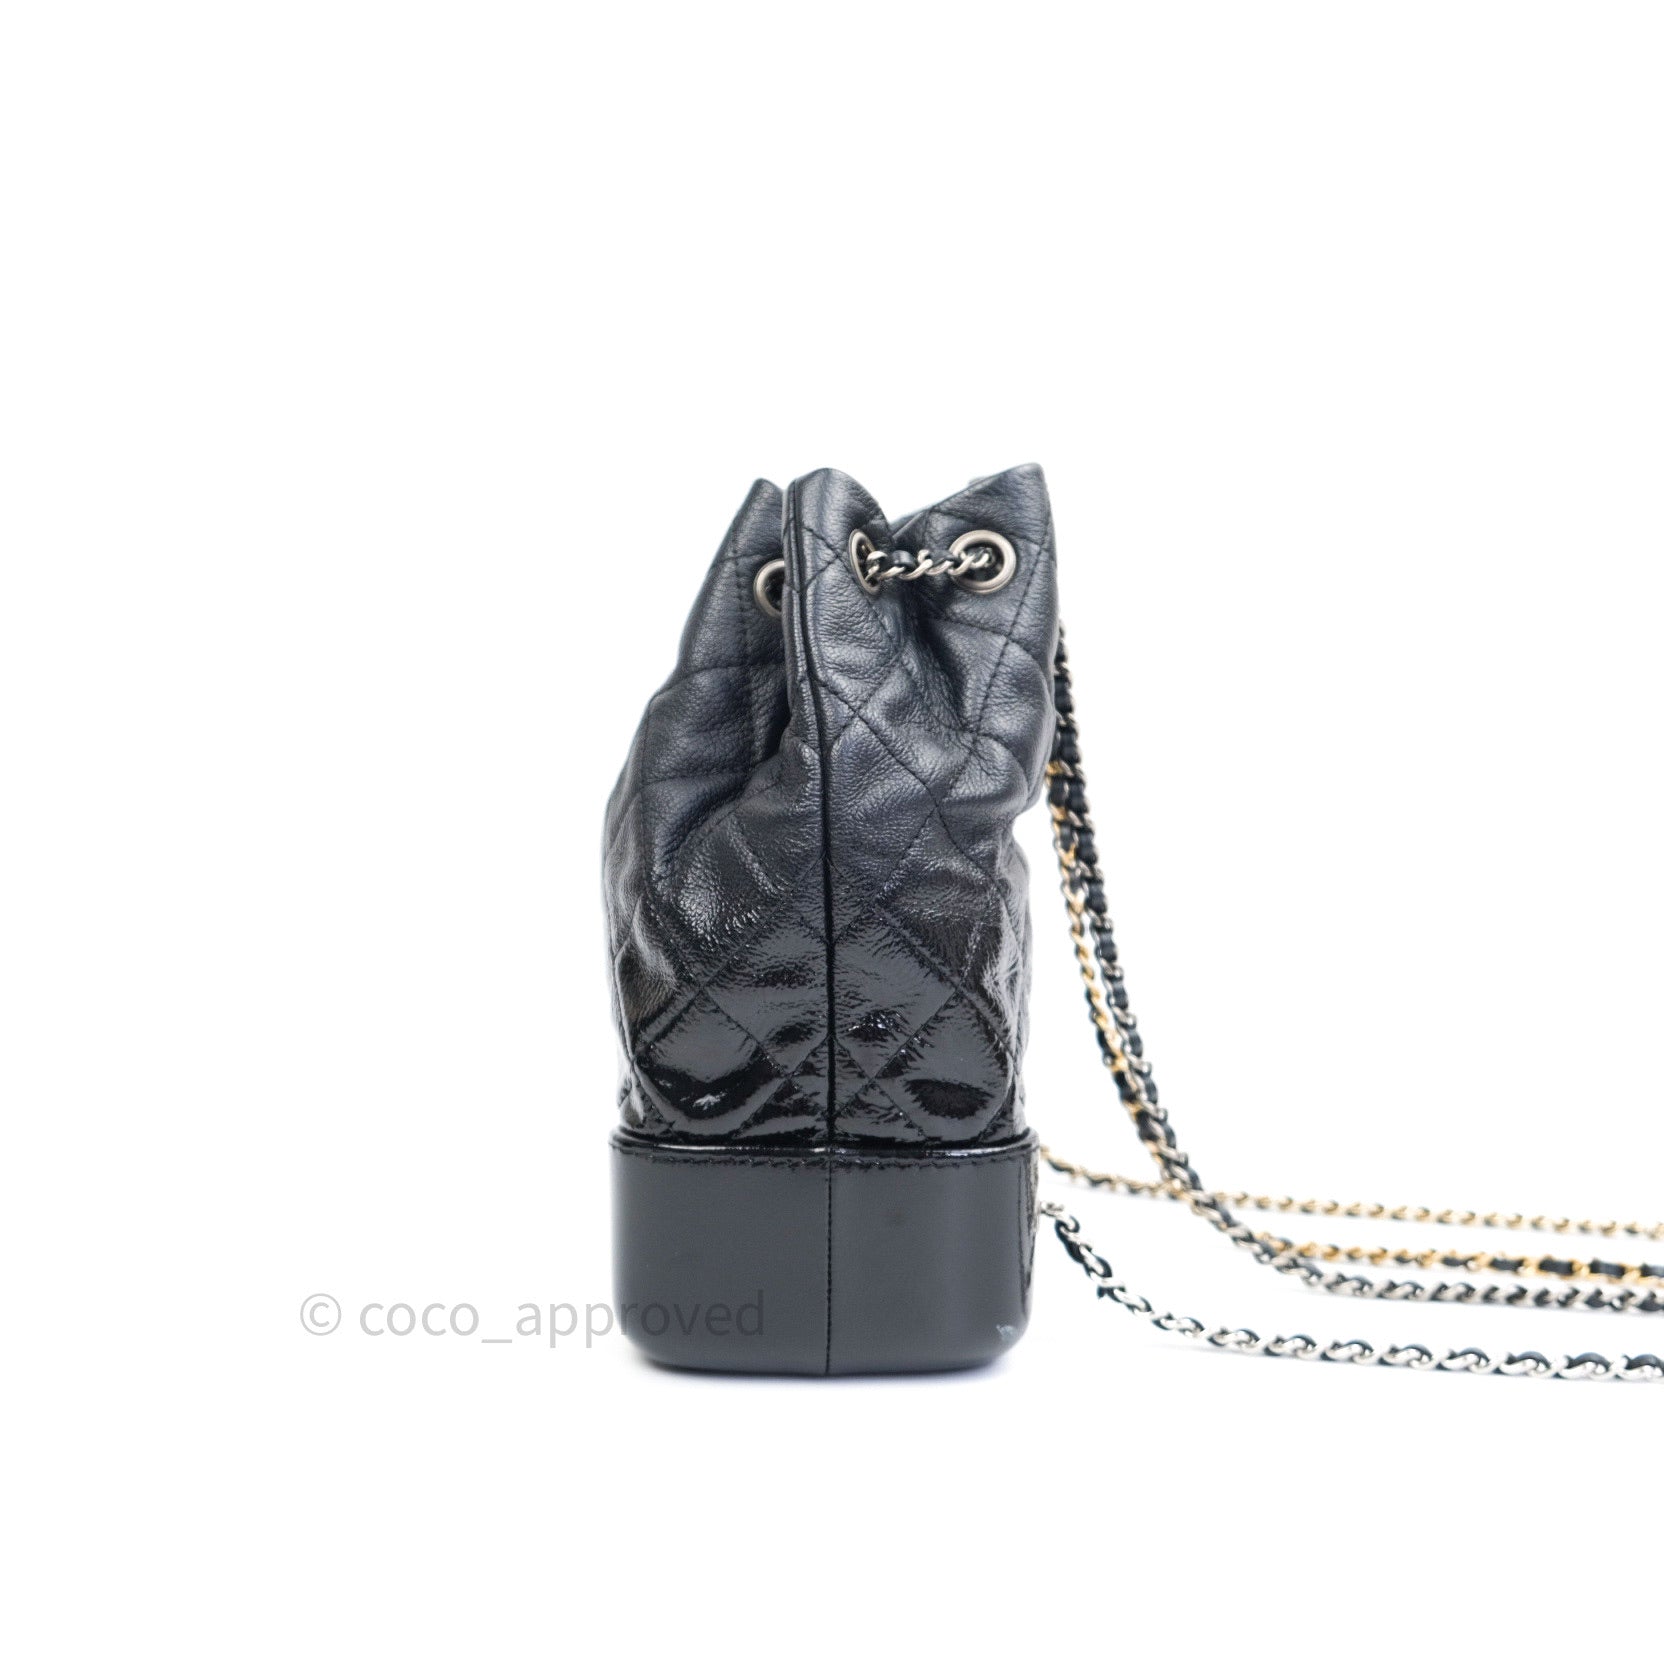 Chanel Gabrielle Backpack Small, Beige and Black, Preowned in Box